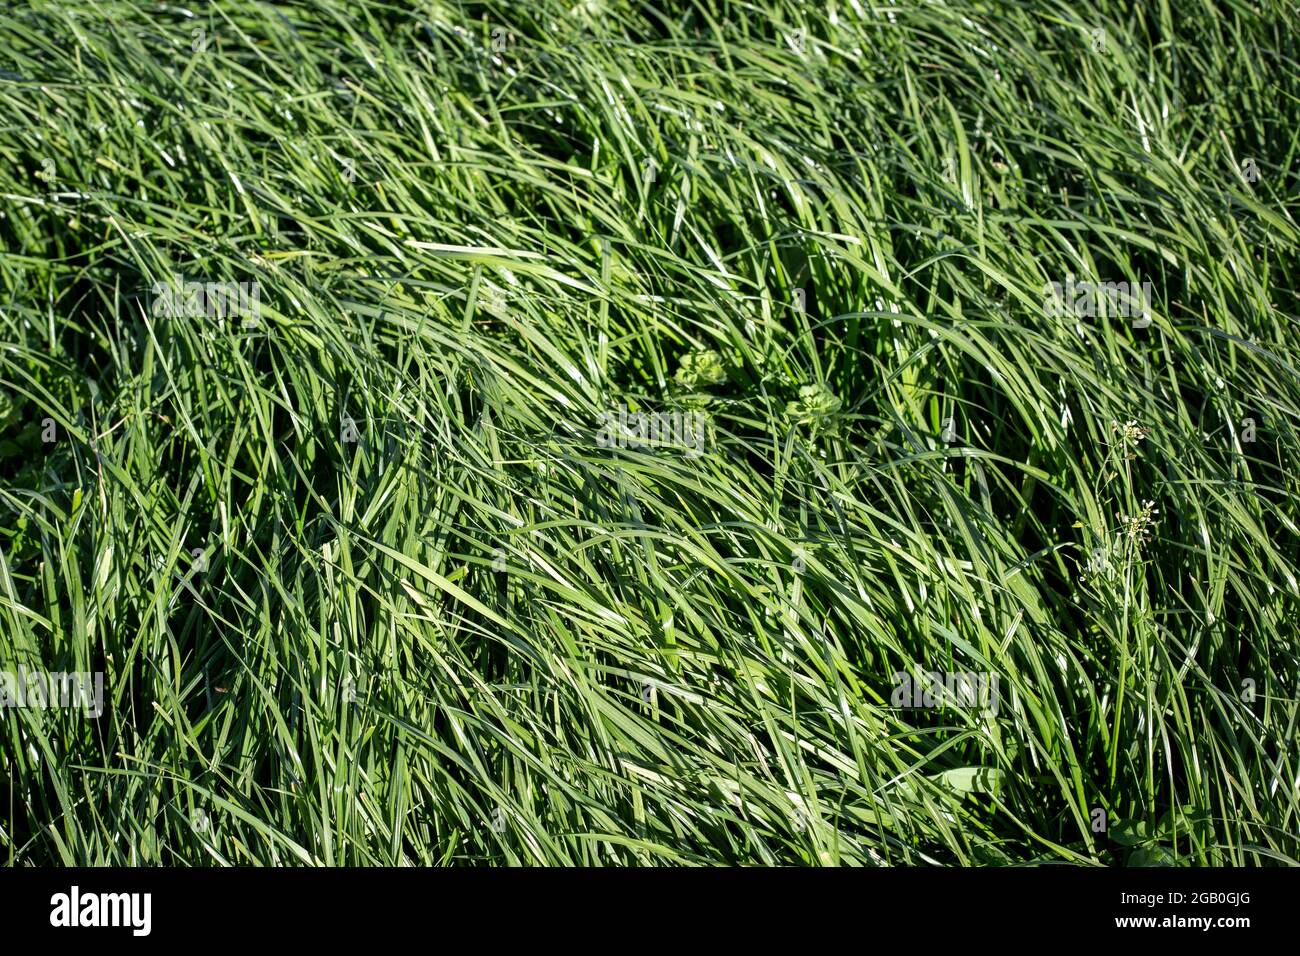 Tall Fescue is a perennial grass with seed-heads, growing up to 1.5 m tall, found in lowland pasture and waste areas. Tolerant of wet soils Stock Photo